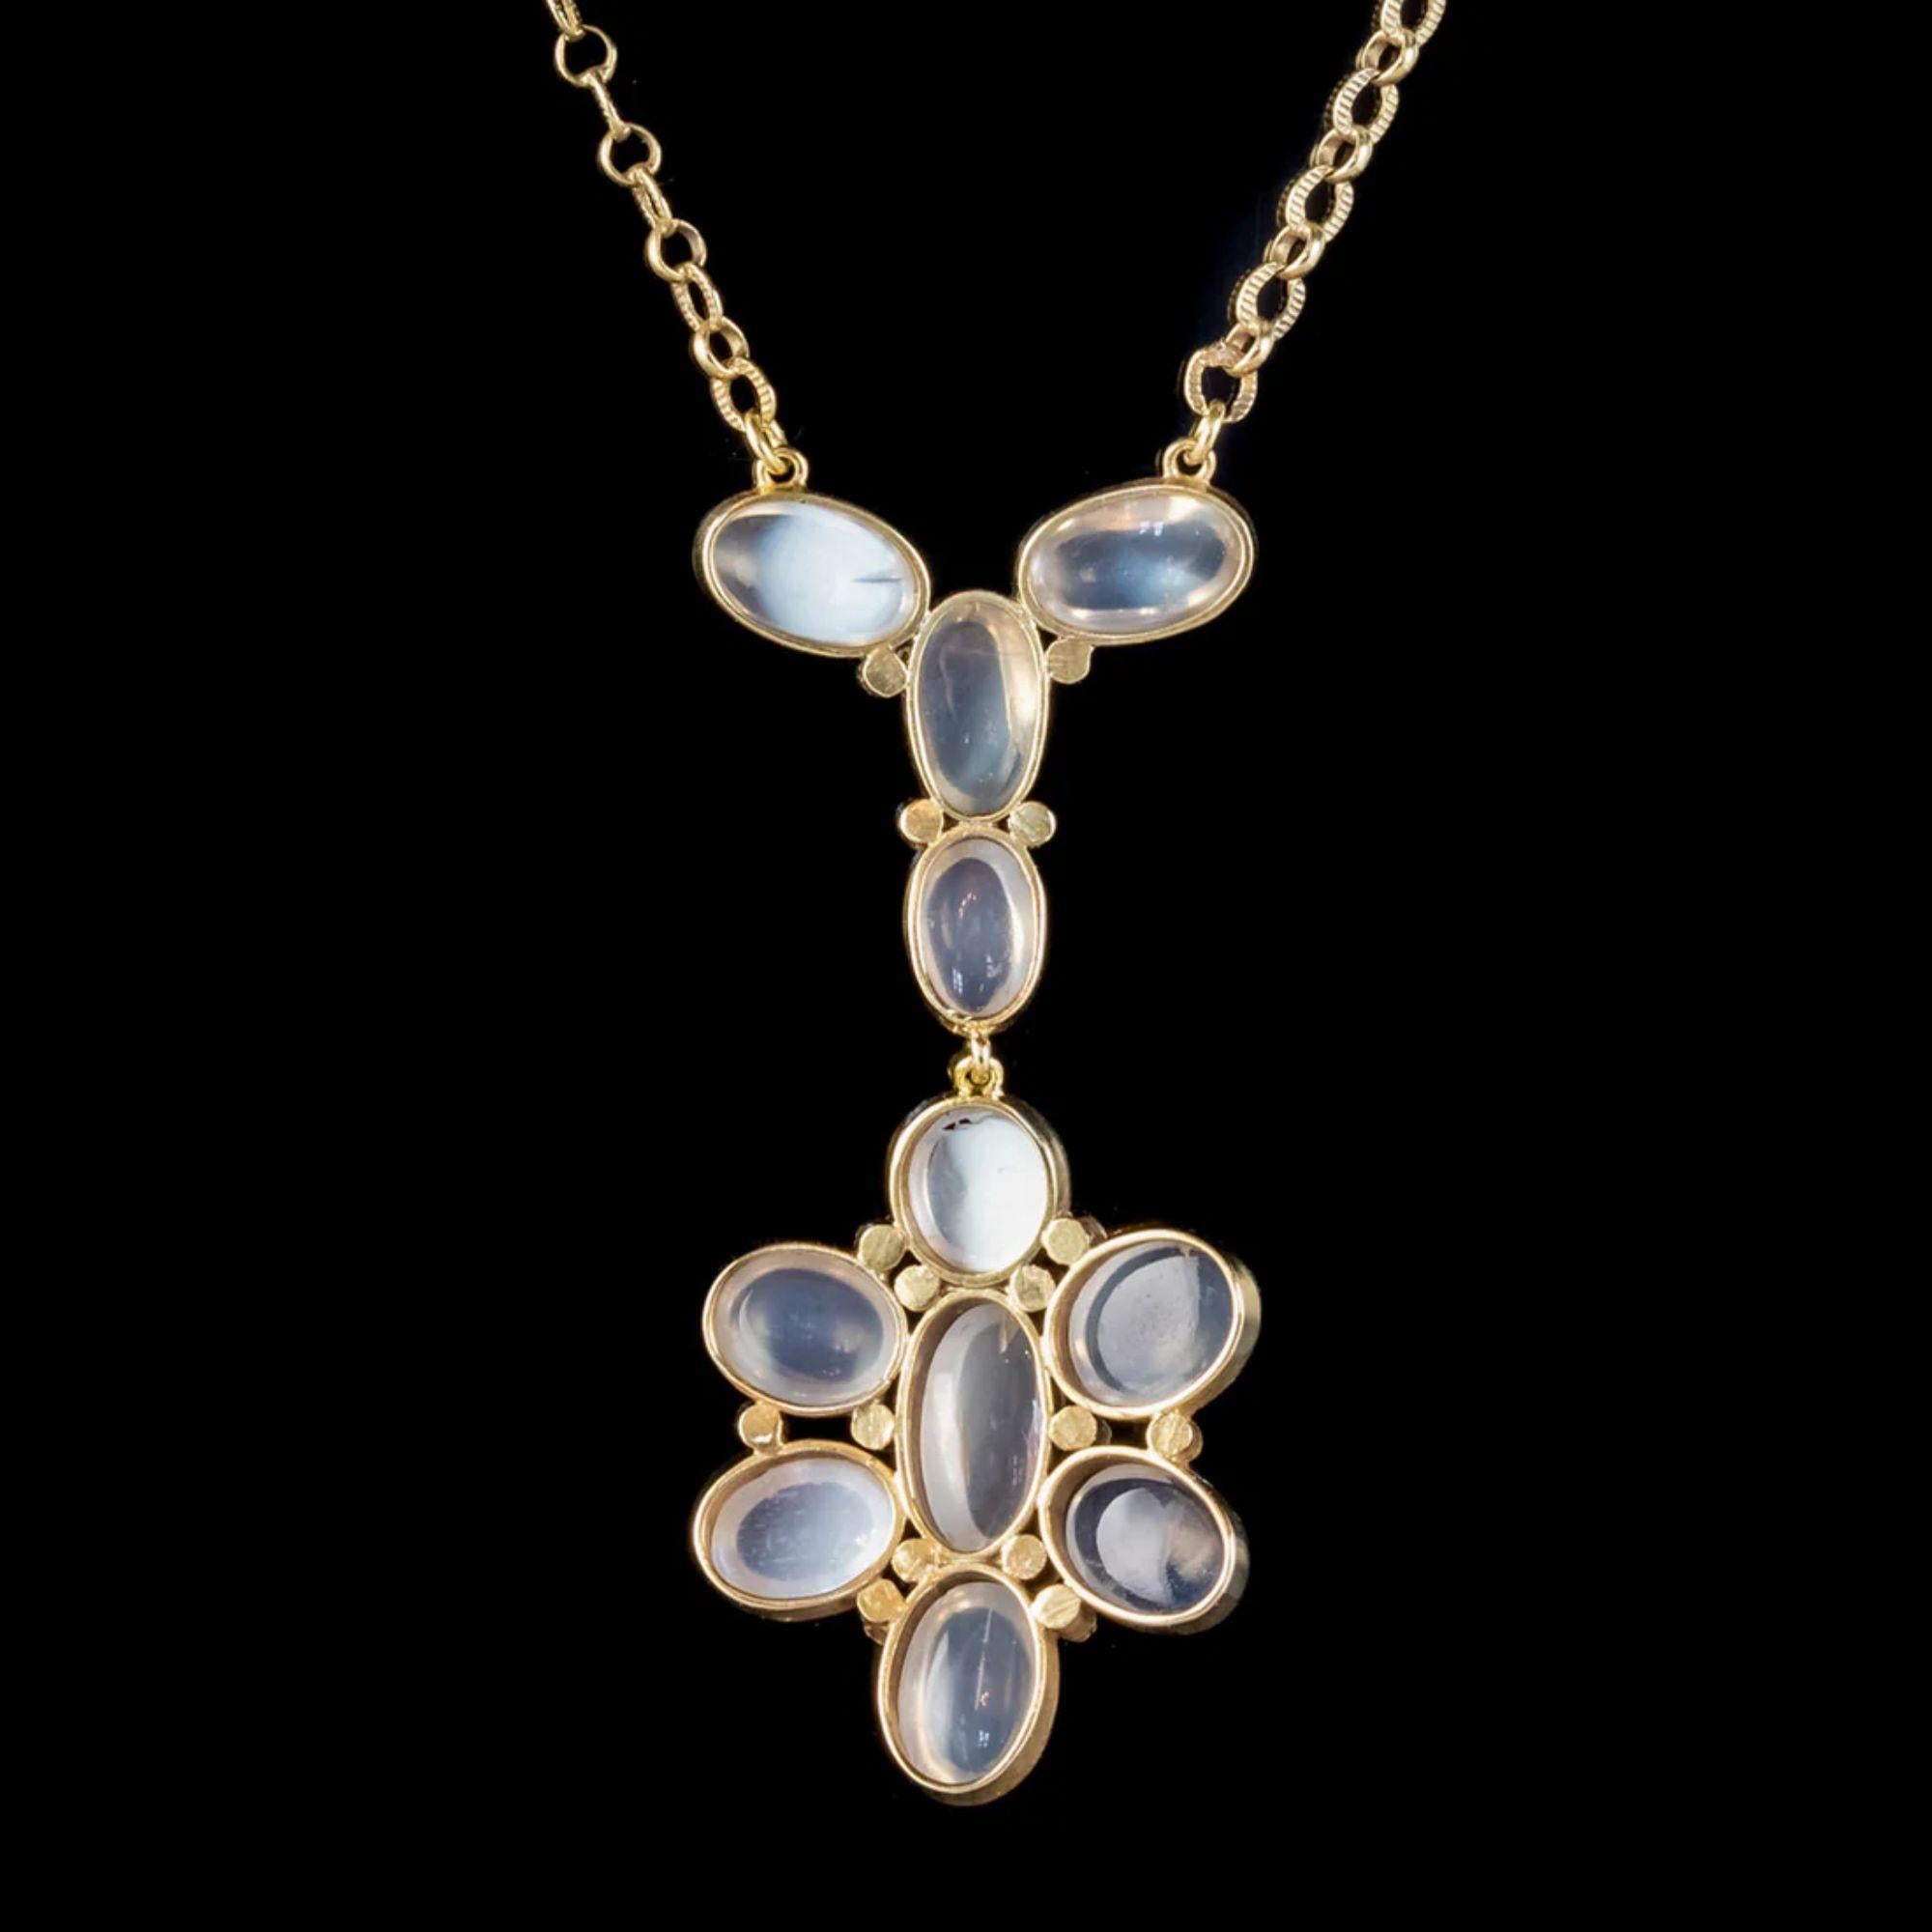 Antique Edwardian Moonstone Lavaliere Pendant Necklace Silver Gold Gilt In Good Condition For Sale In Kendal, GB